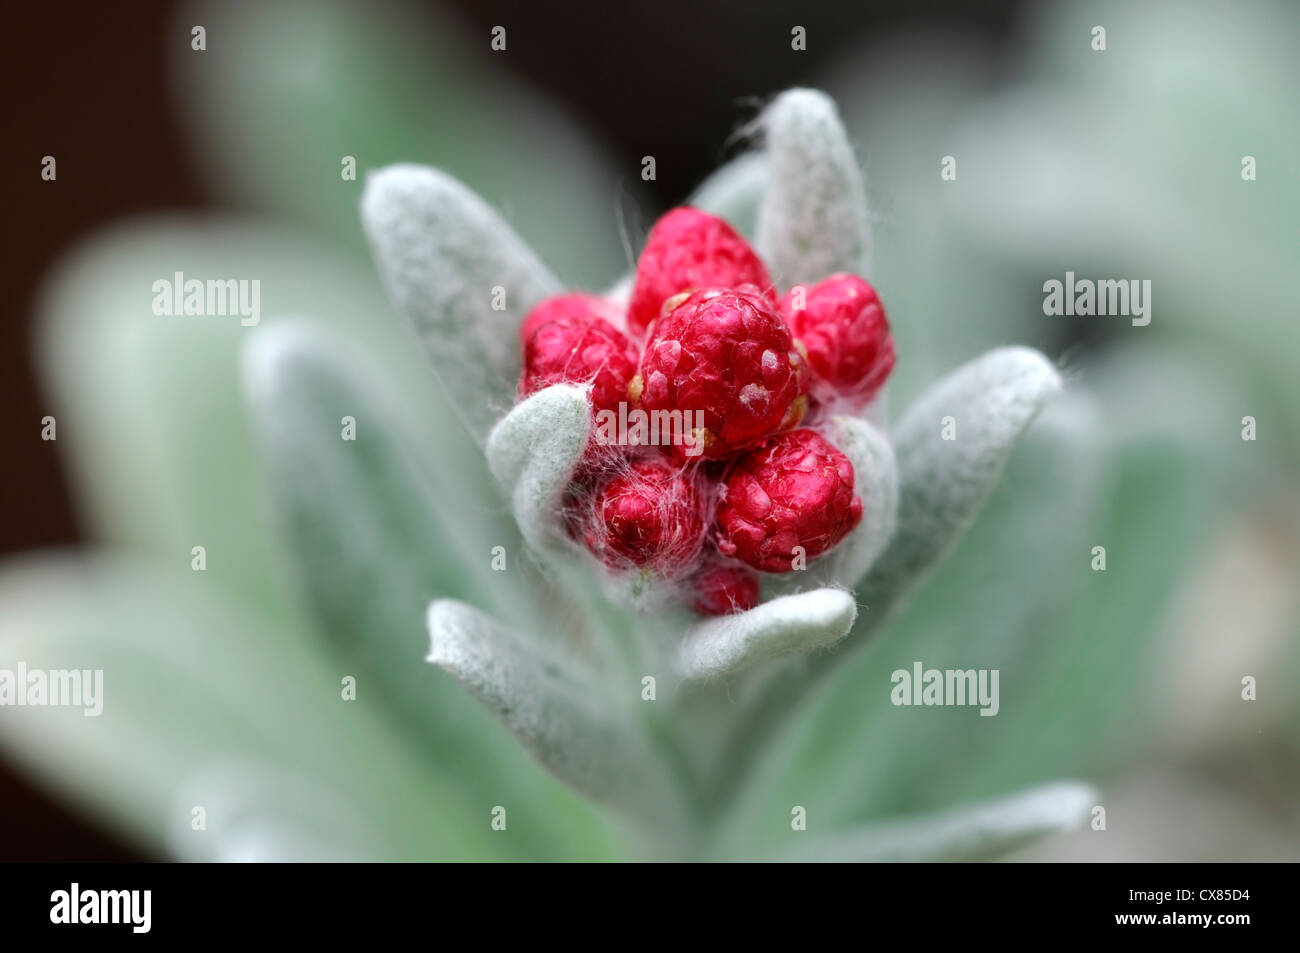 helichrysum ruby cluster bright red buds closeup plant portraits bright red flower buds silvery grey woolly leaves foliage Stock Photo